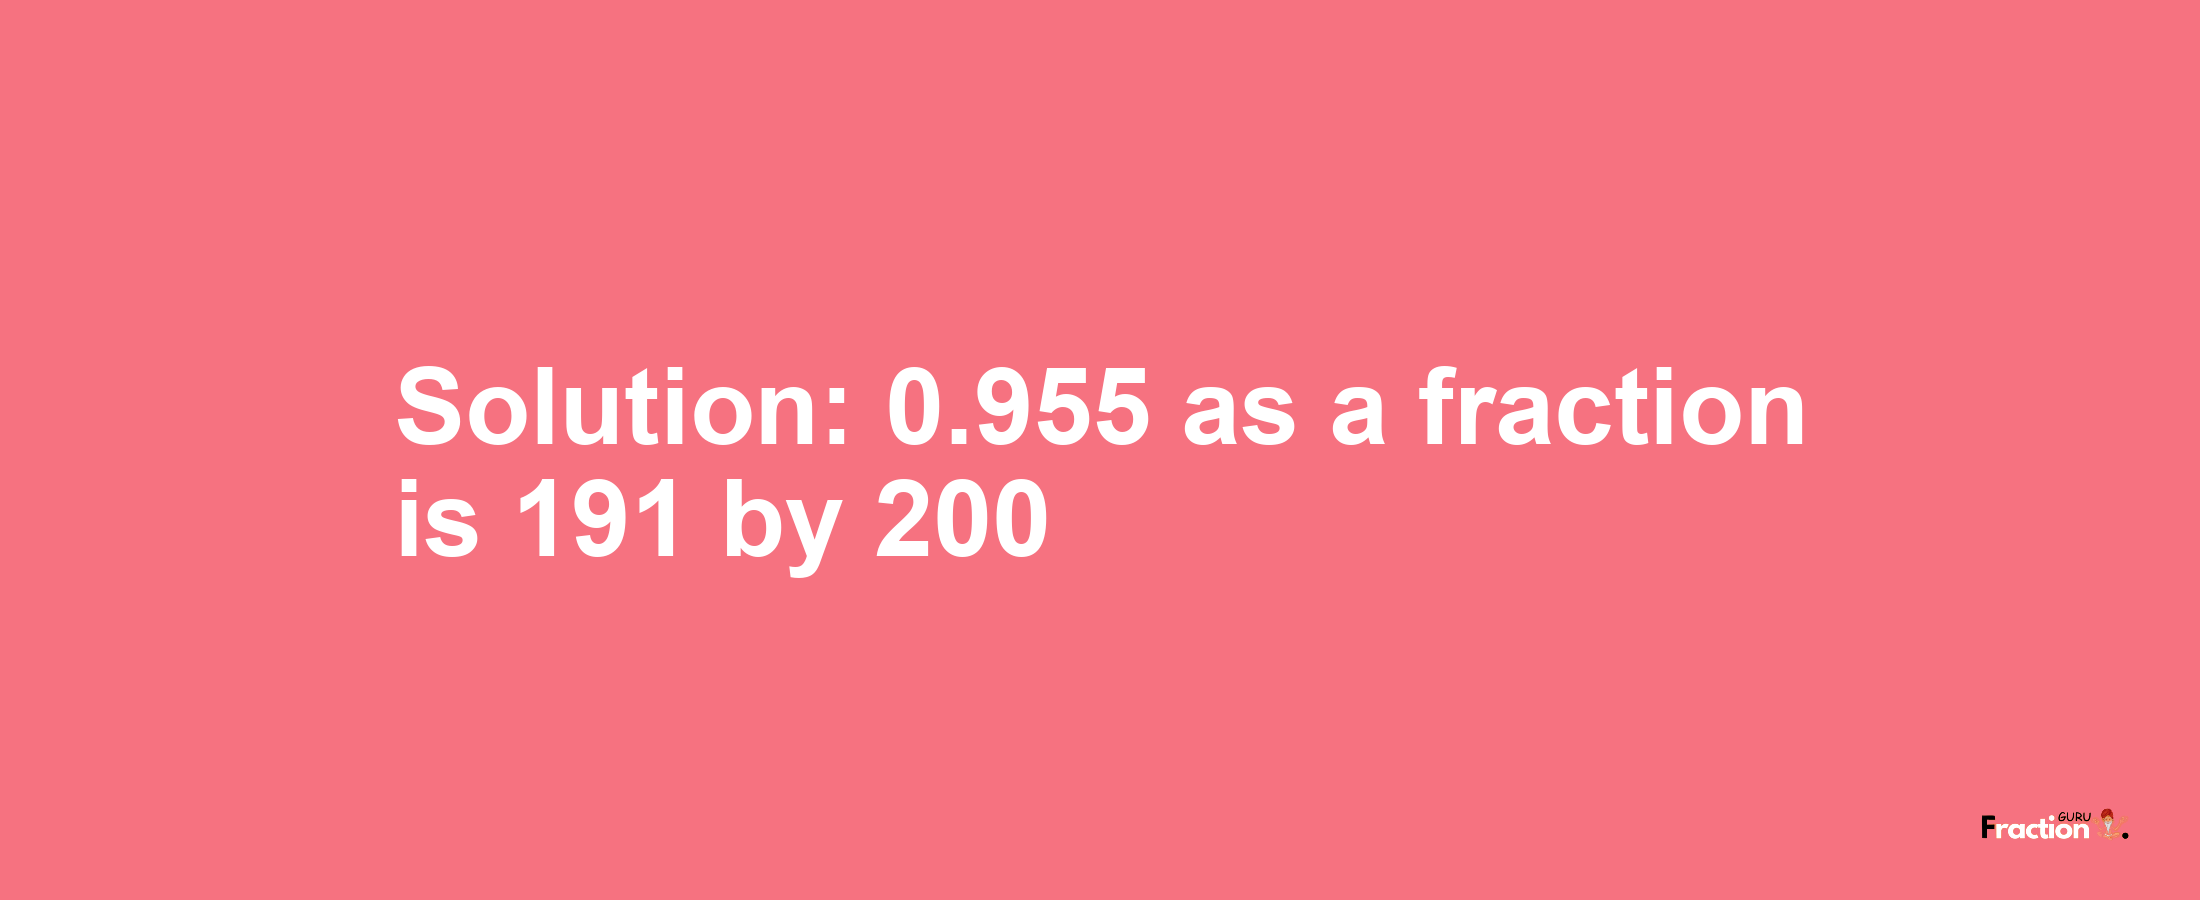 Solution:0.955 as a fraction is 191/200